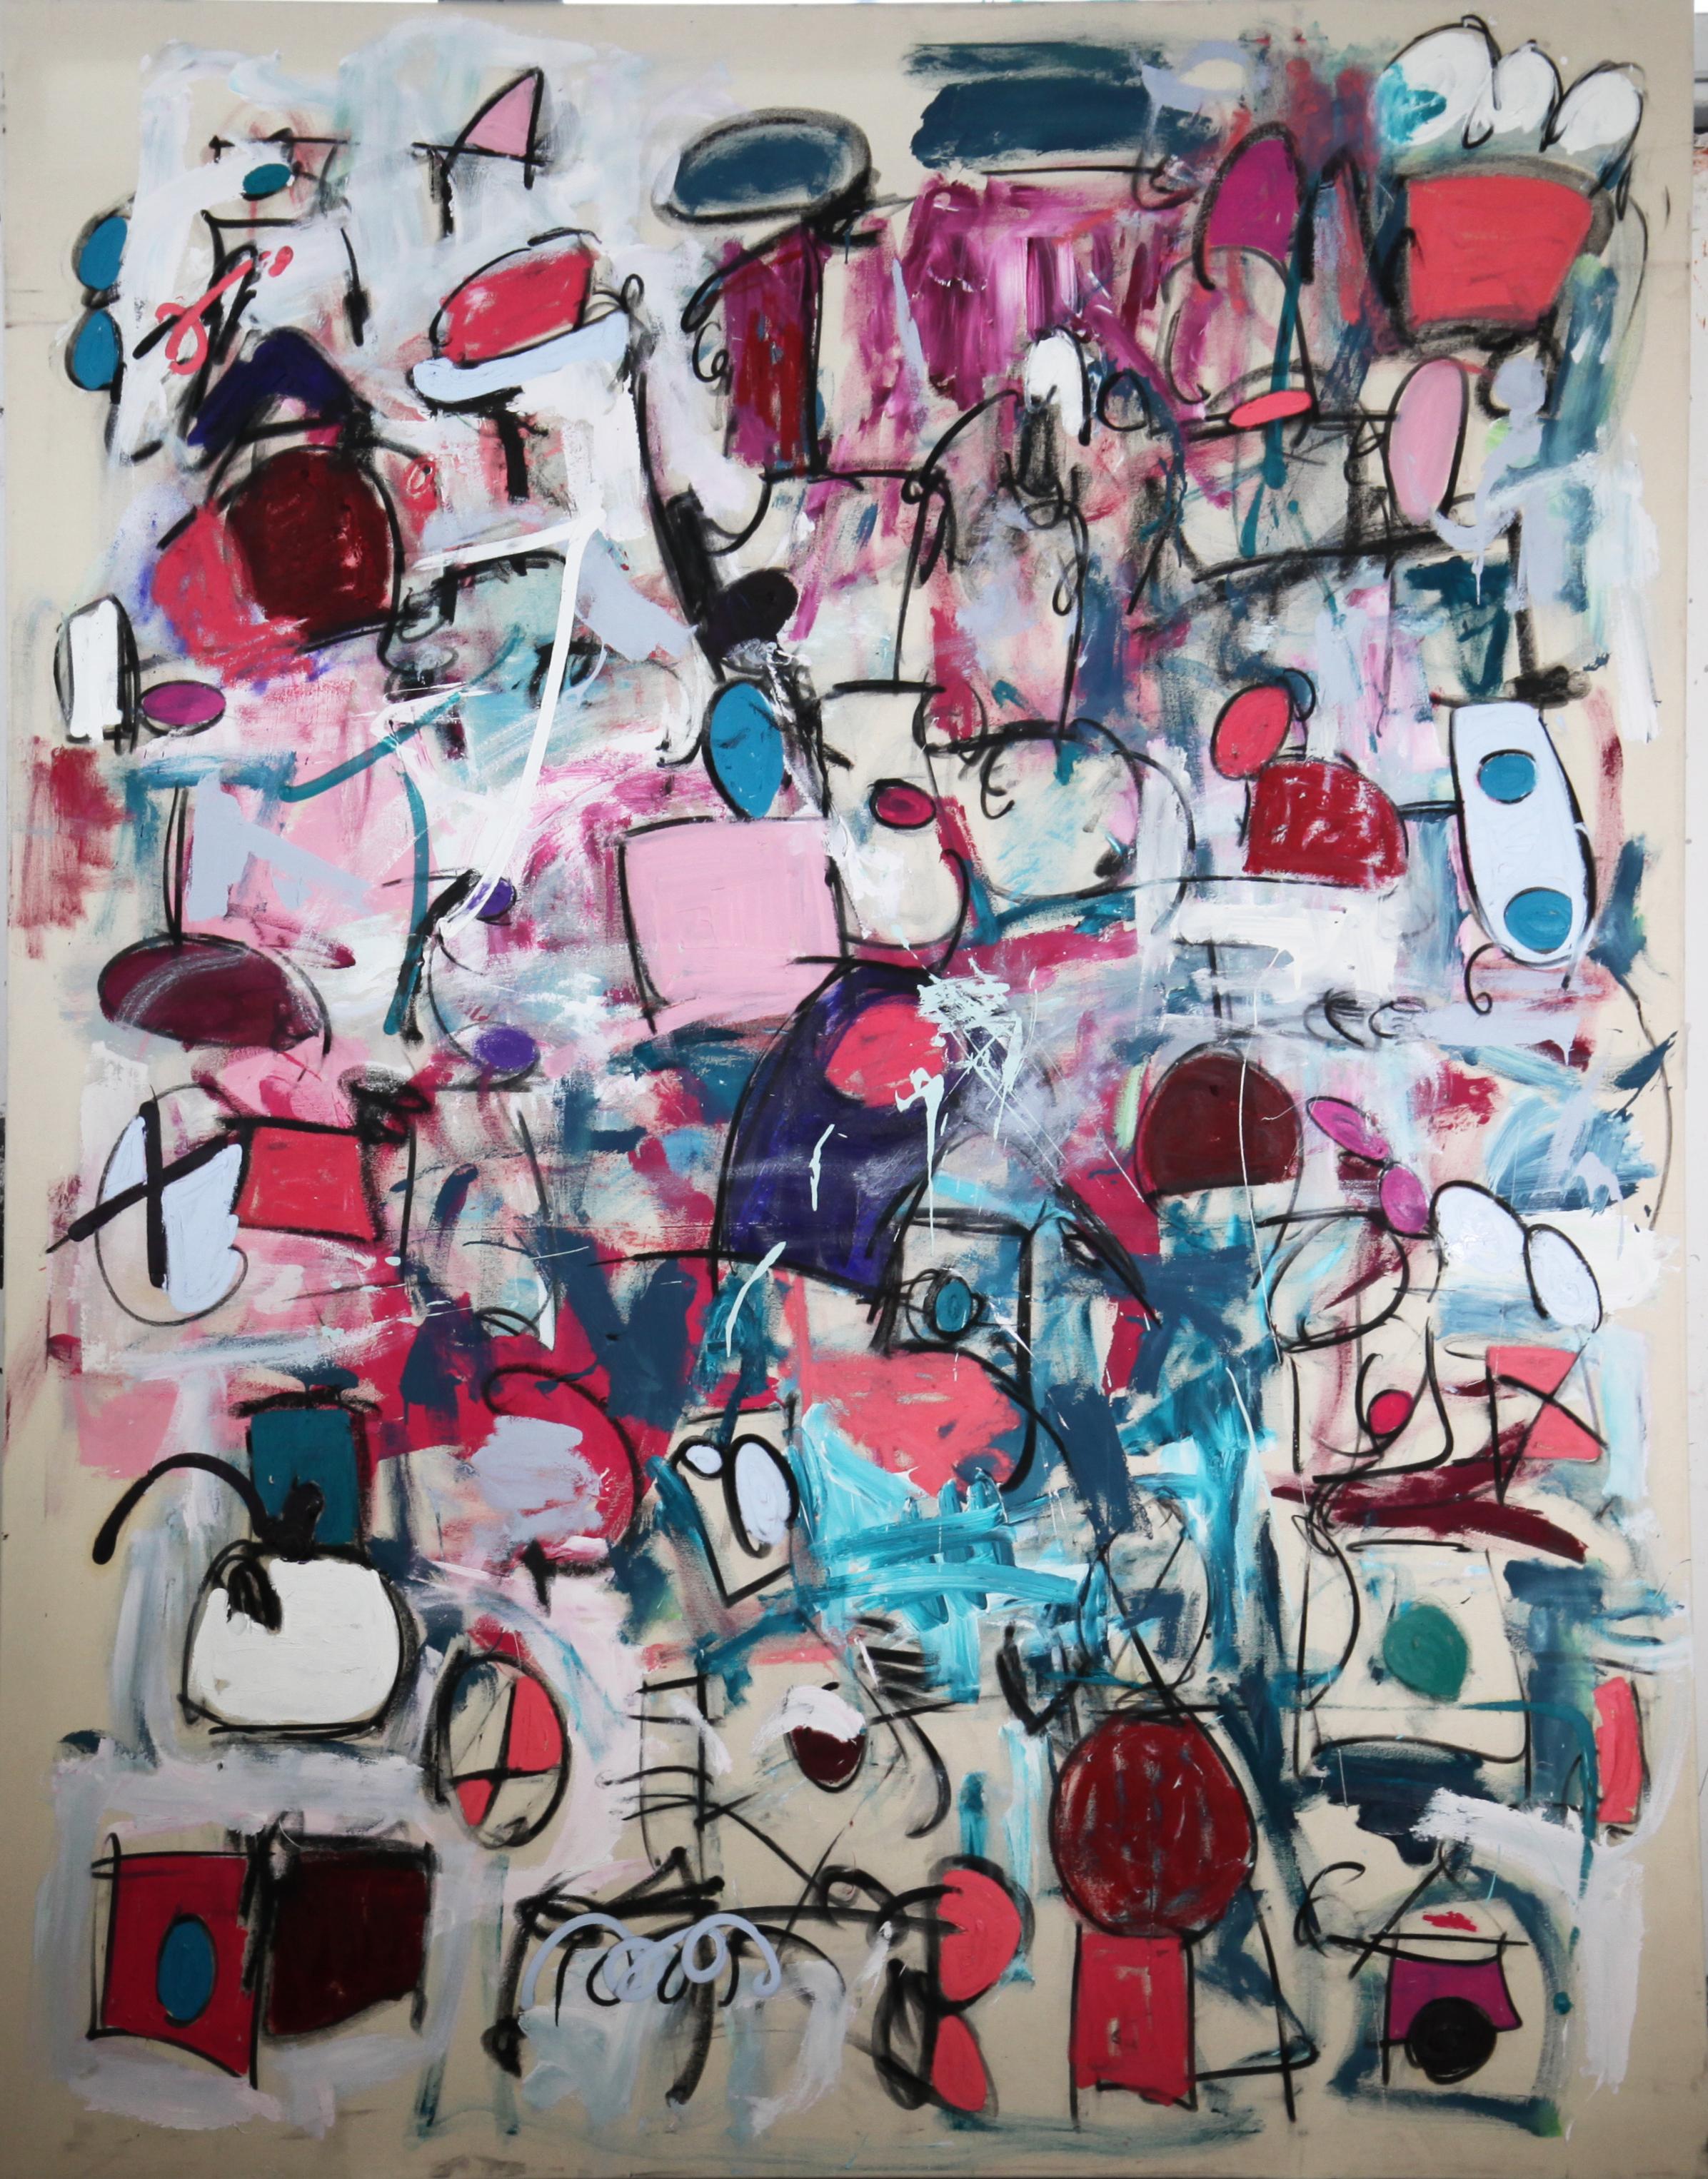 "You Go To My Head" Large Colorful Abstract Painting / Blue White and Pink  - Mixed Media Art by Taher Jaoui